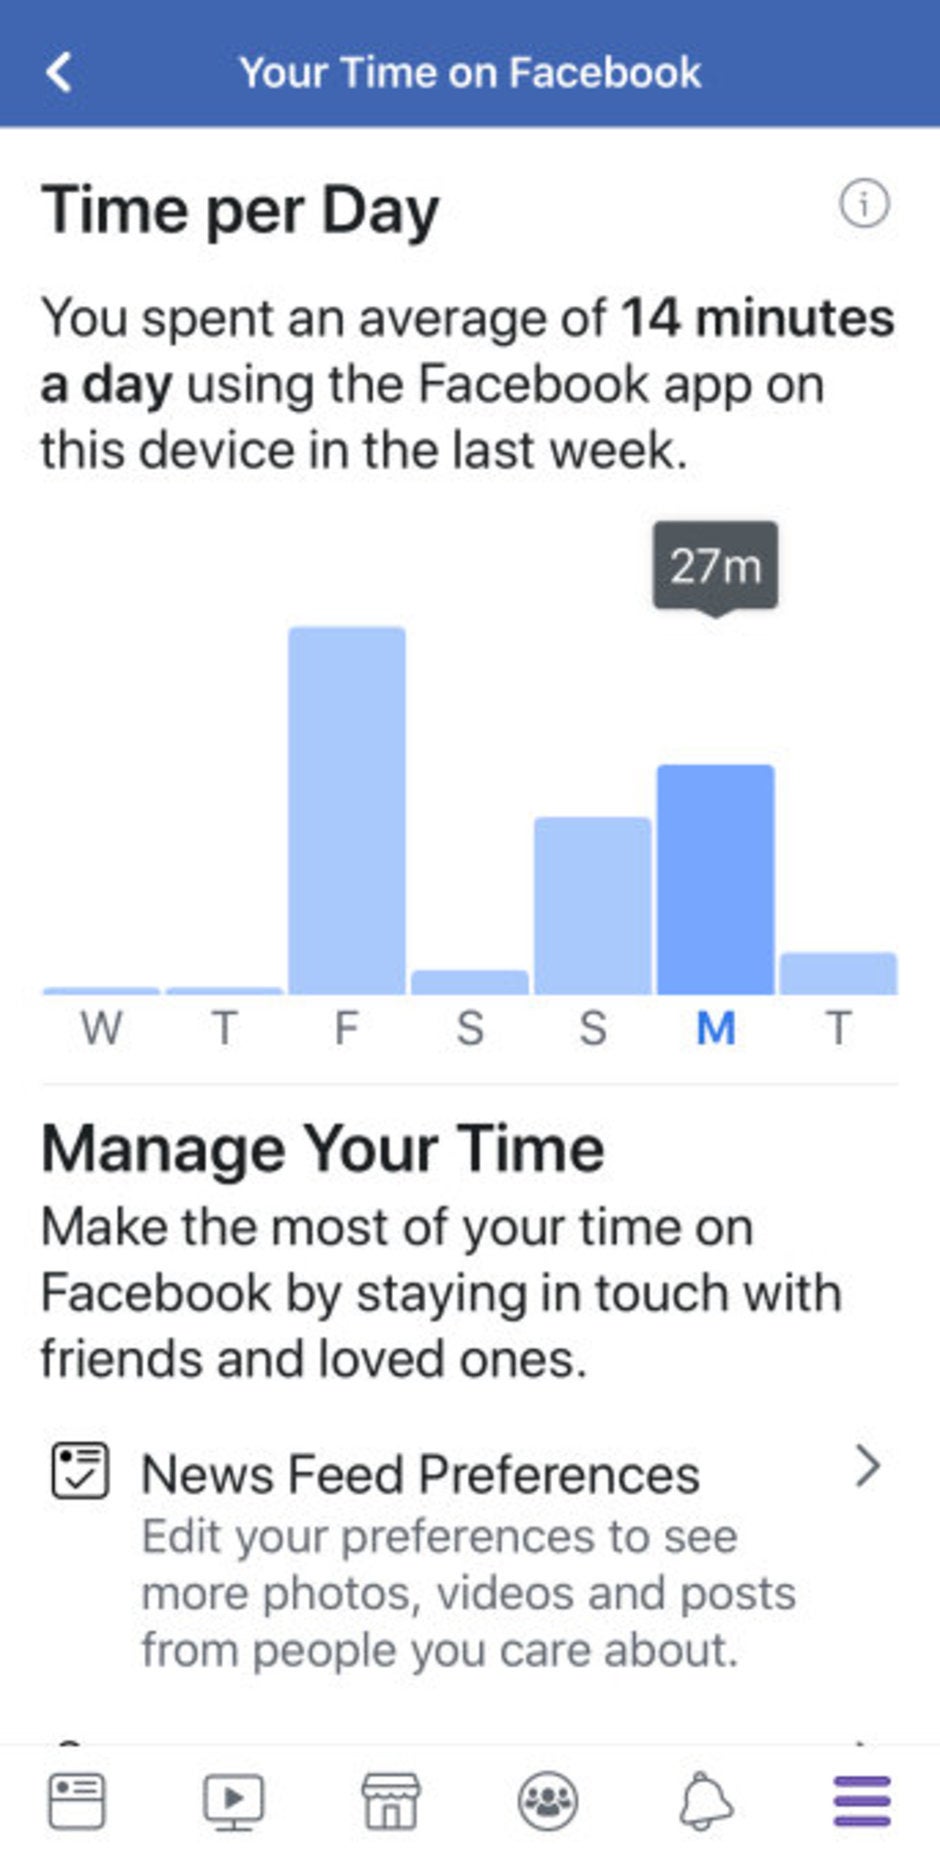 Facebook rolls out new feature that counts how much time you spend on the app